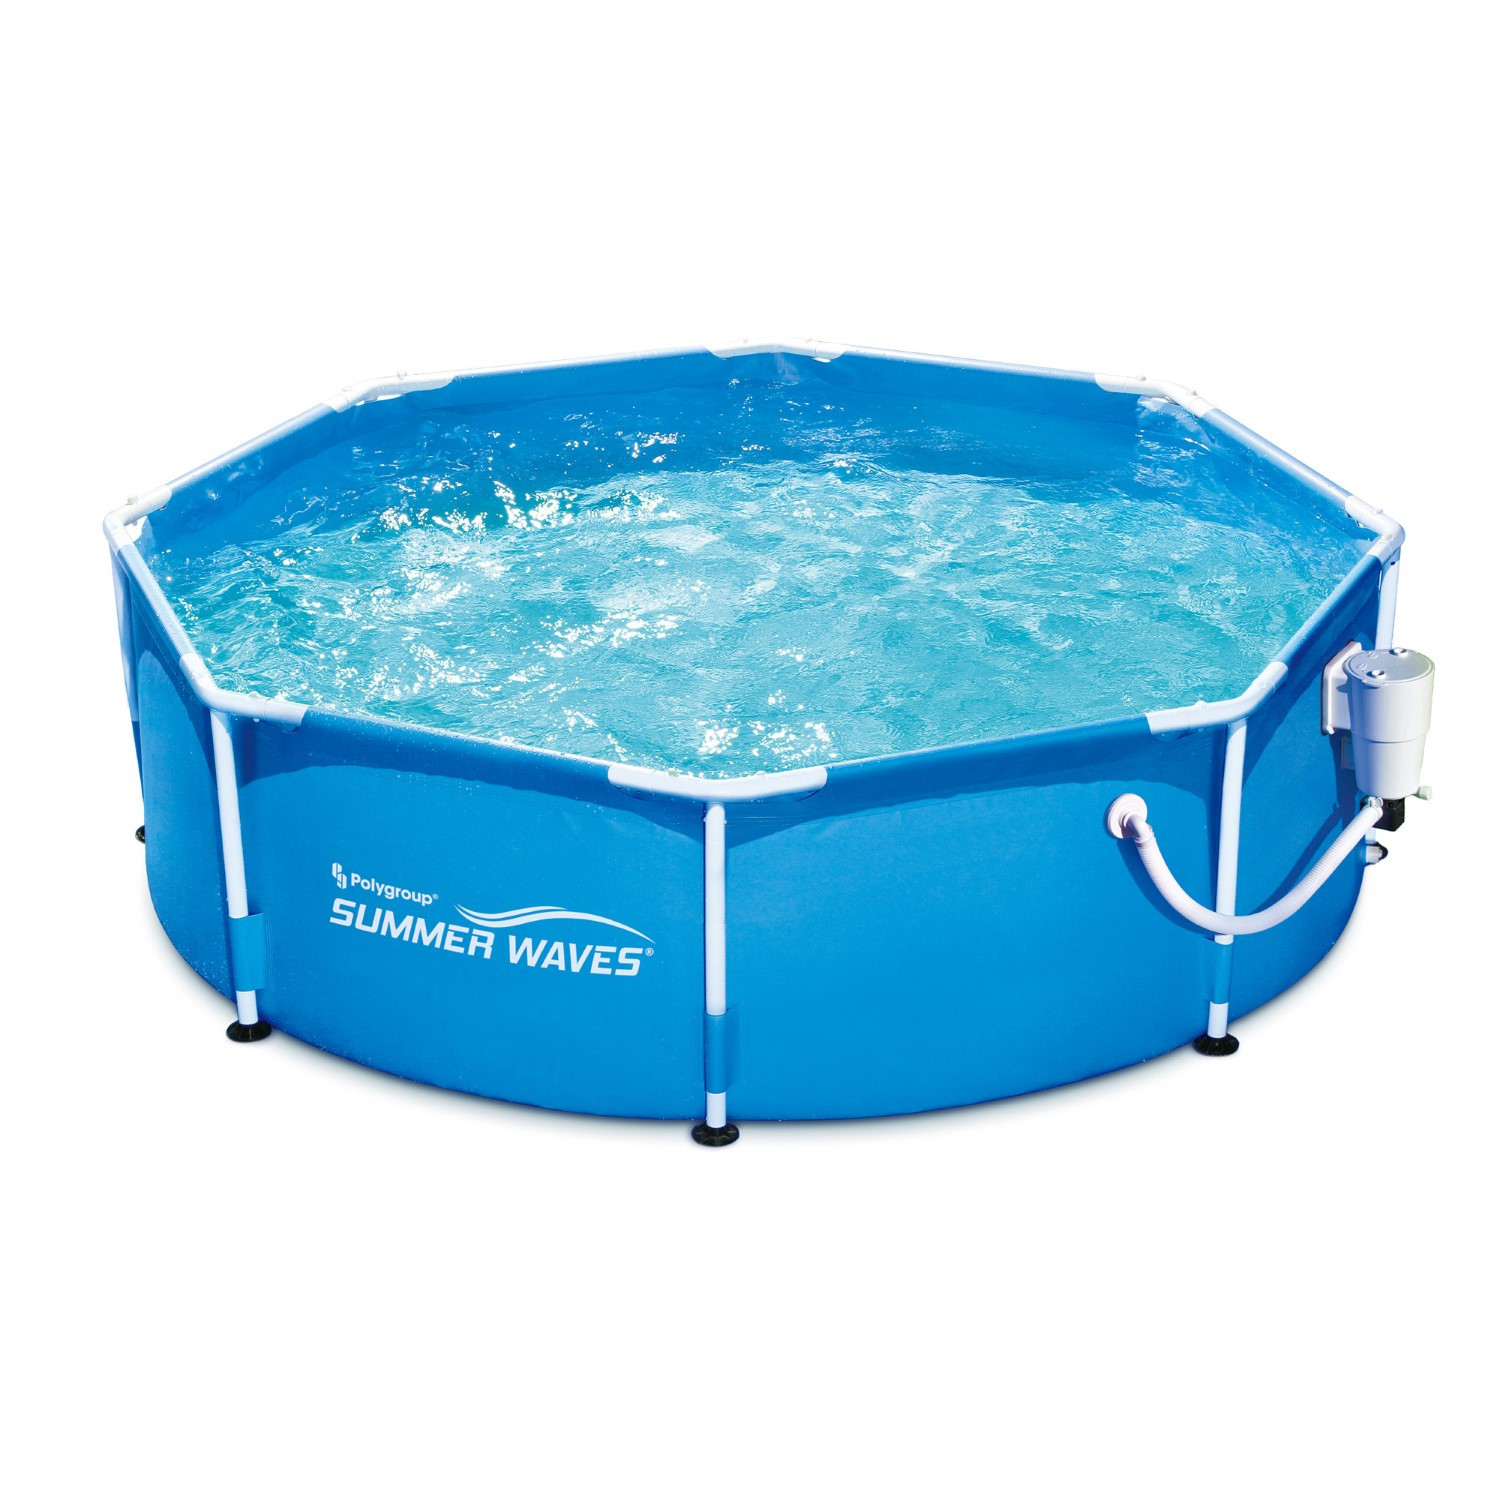 4 Ft Above Ground Pool
 Summer Waves 8 Ft Metal Frame Ground Pool with